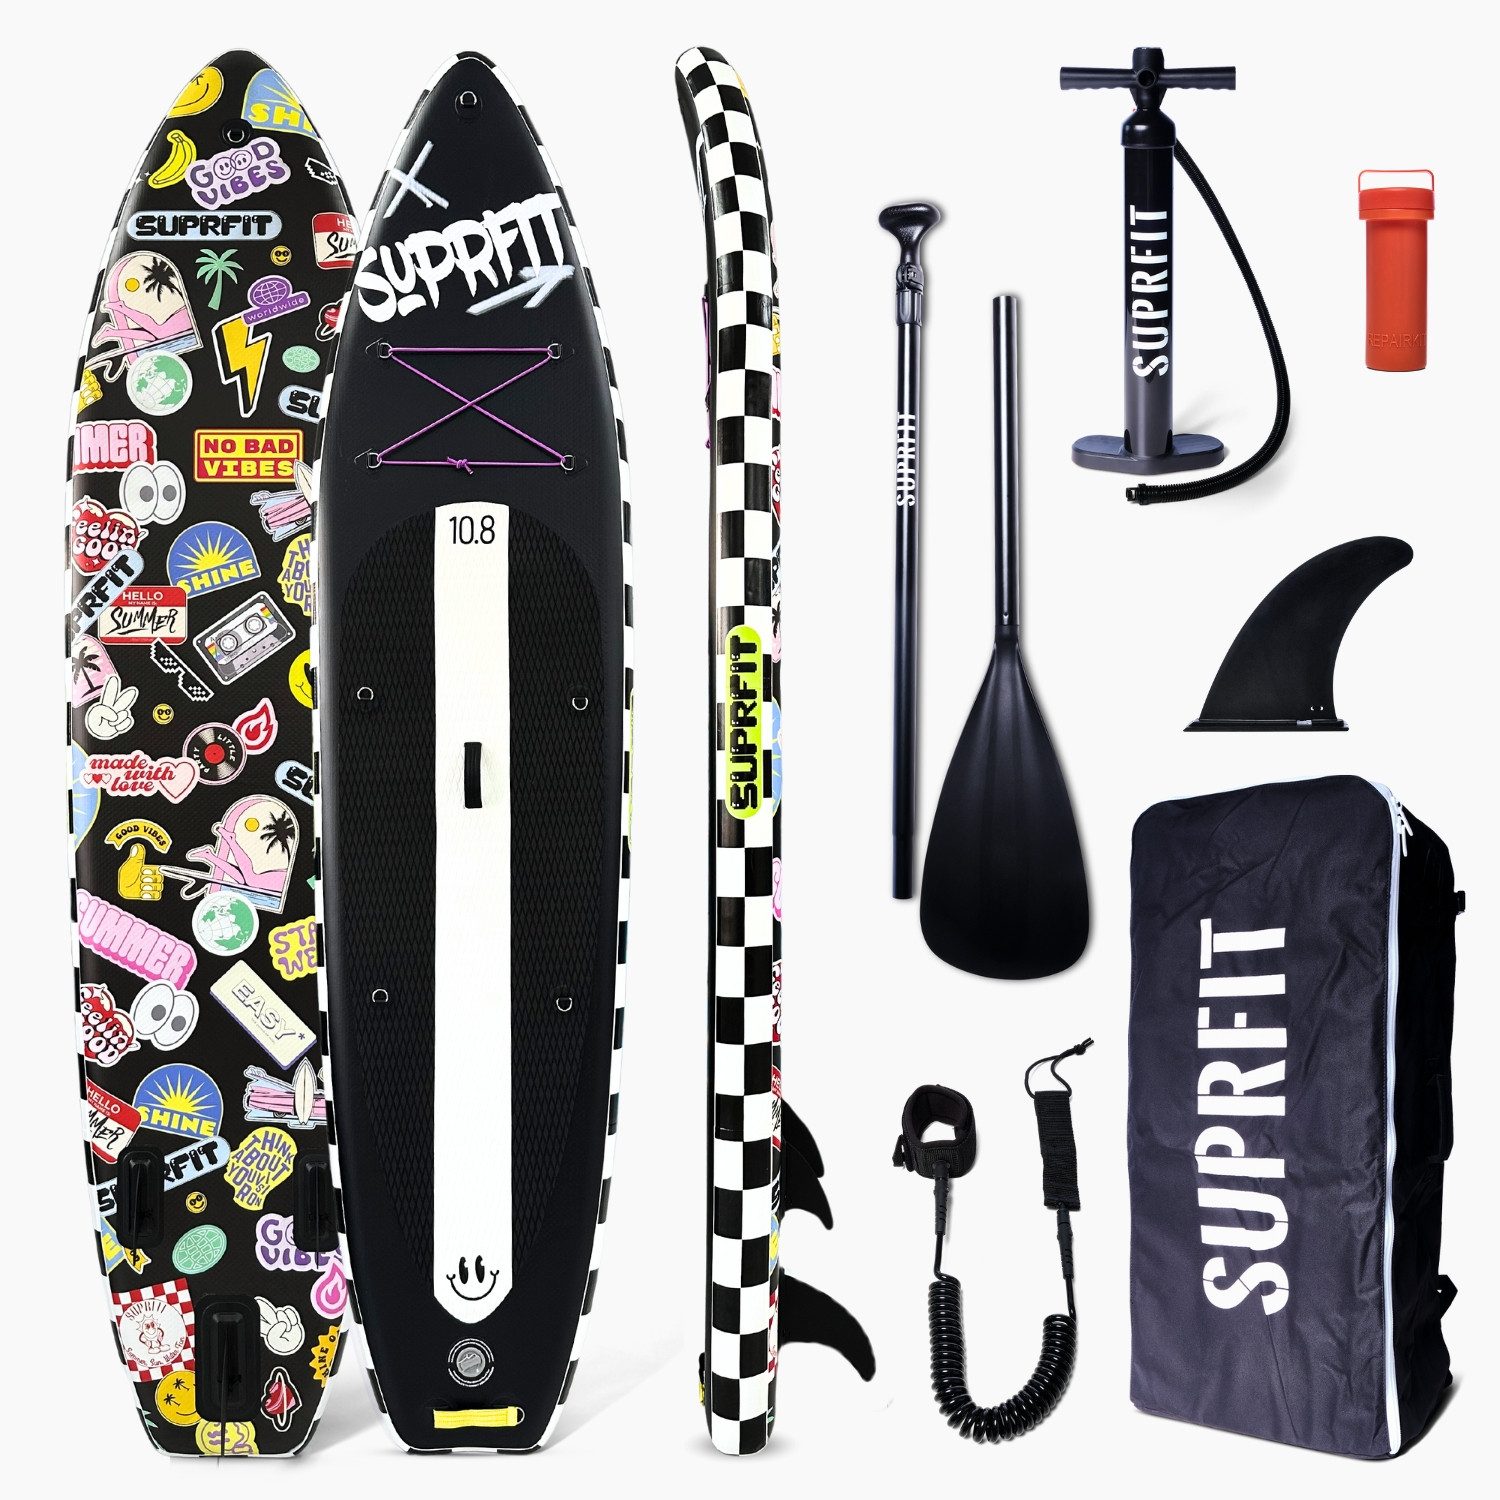 SF SUPRFIT Inflatable SUP-Board Stand-Up Paddling Board Funny Stickers – Black, Touring, All in one, Anti-Rutsch Deckpad, belastbares und langlebiges Material